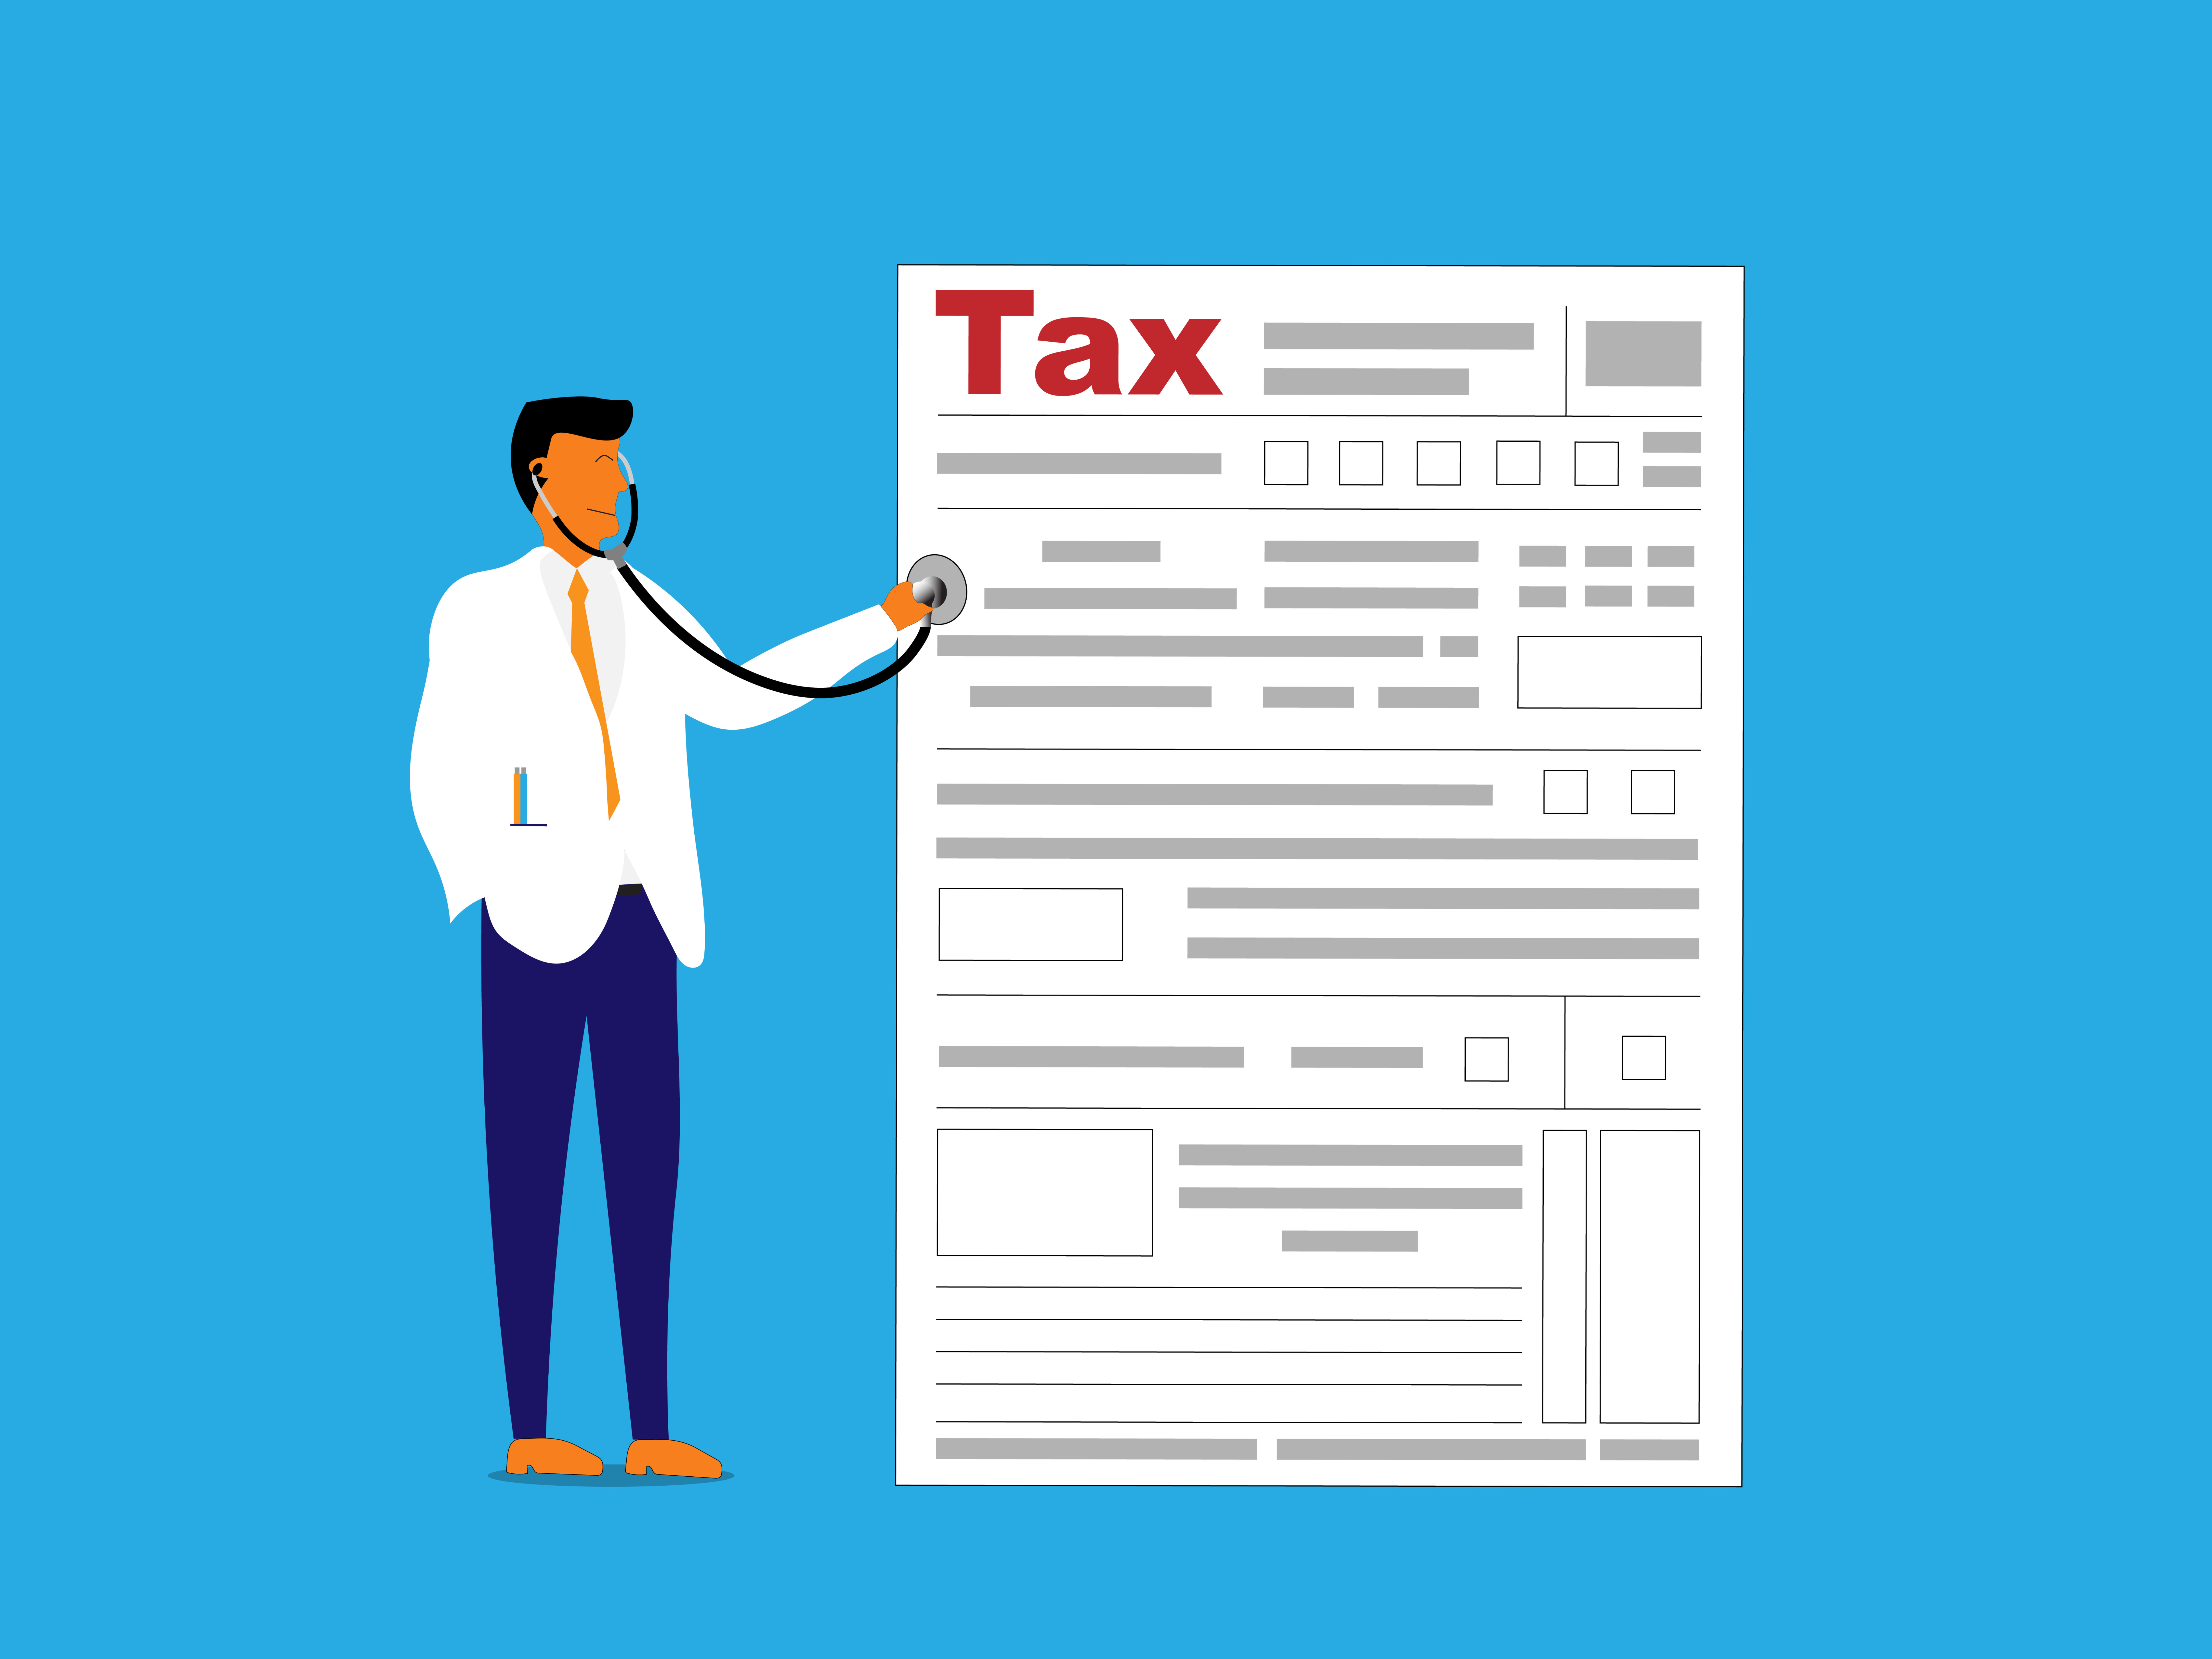 Your FY22/23 Tax Time Tips - Image